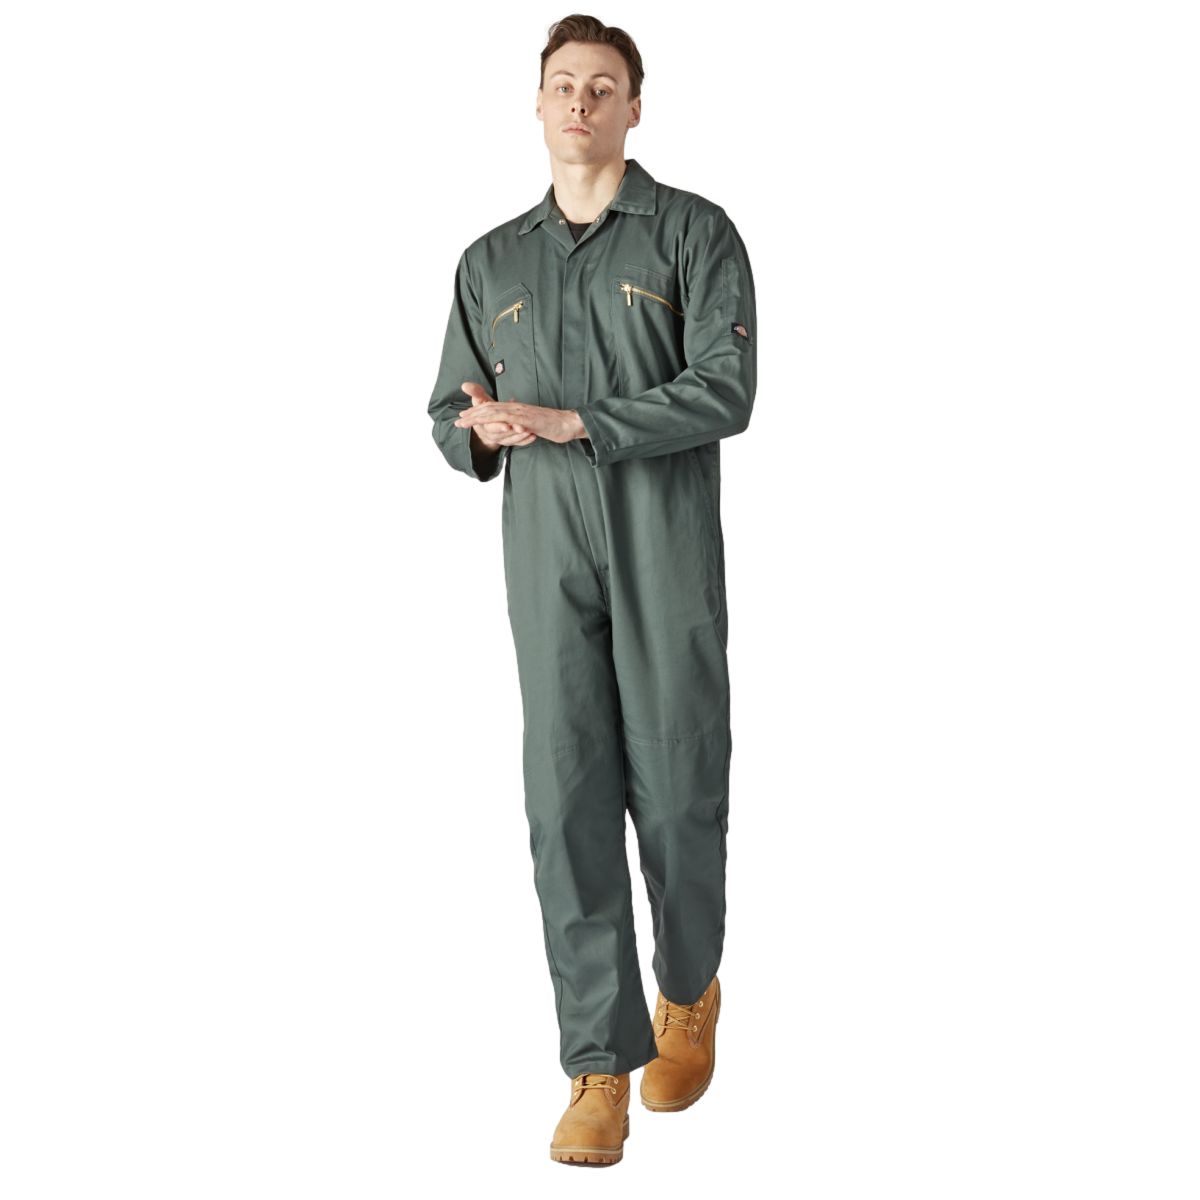 Combinaison Redhawk Coverhall Vert - Dickies - Taille XL 2